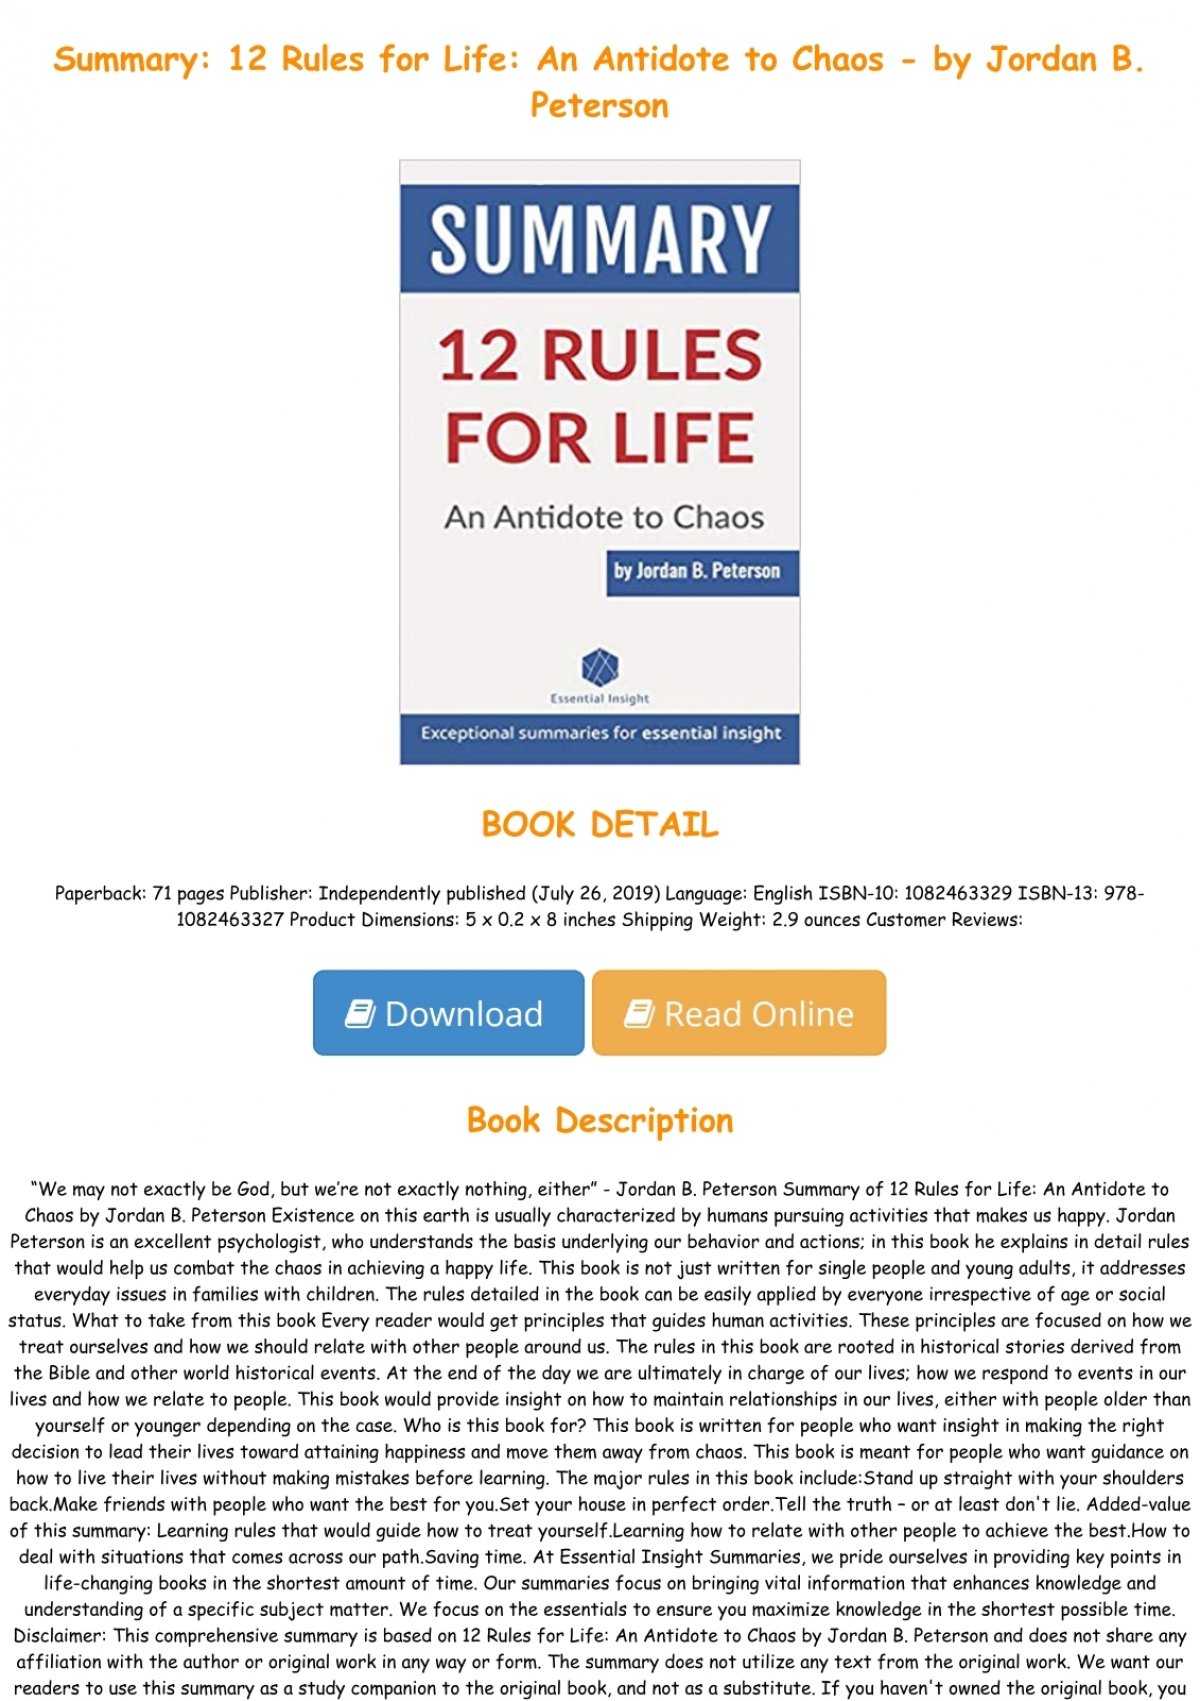 Jordan Peterson's 12 Rules For Life: Book Summary & Review